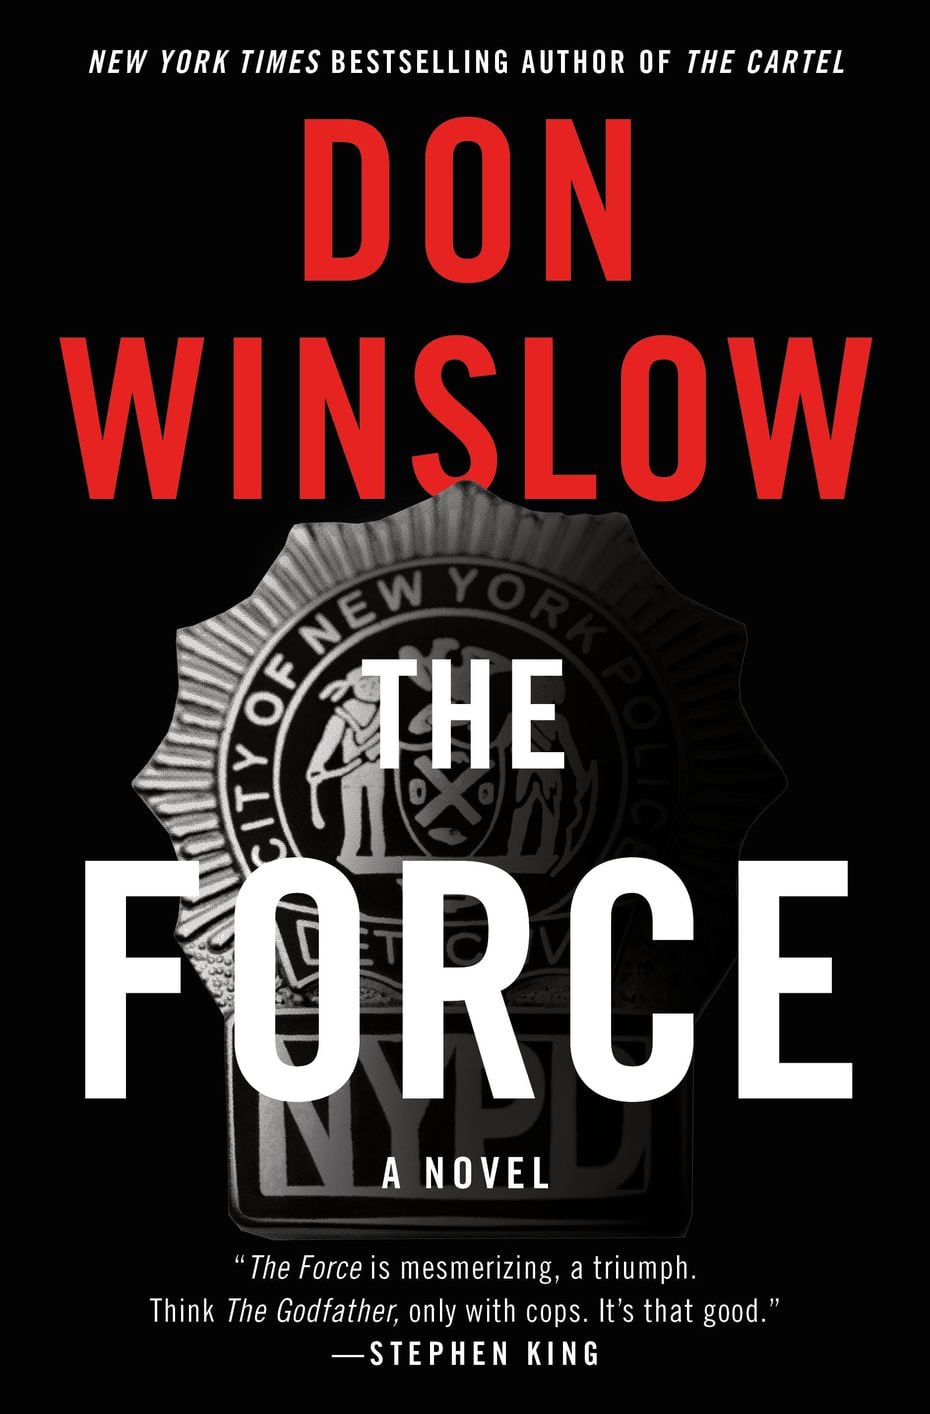 the force winslow review